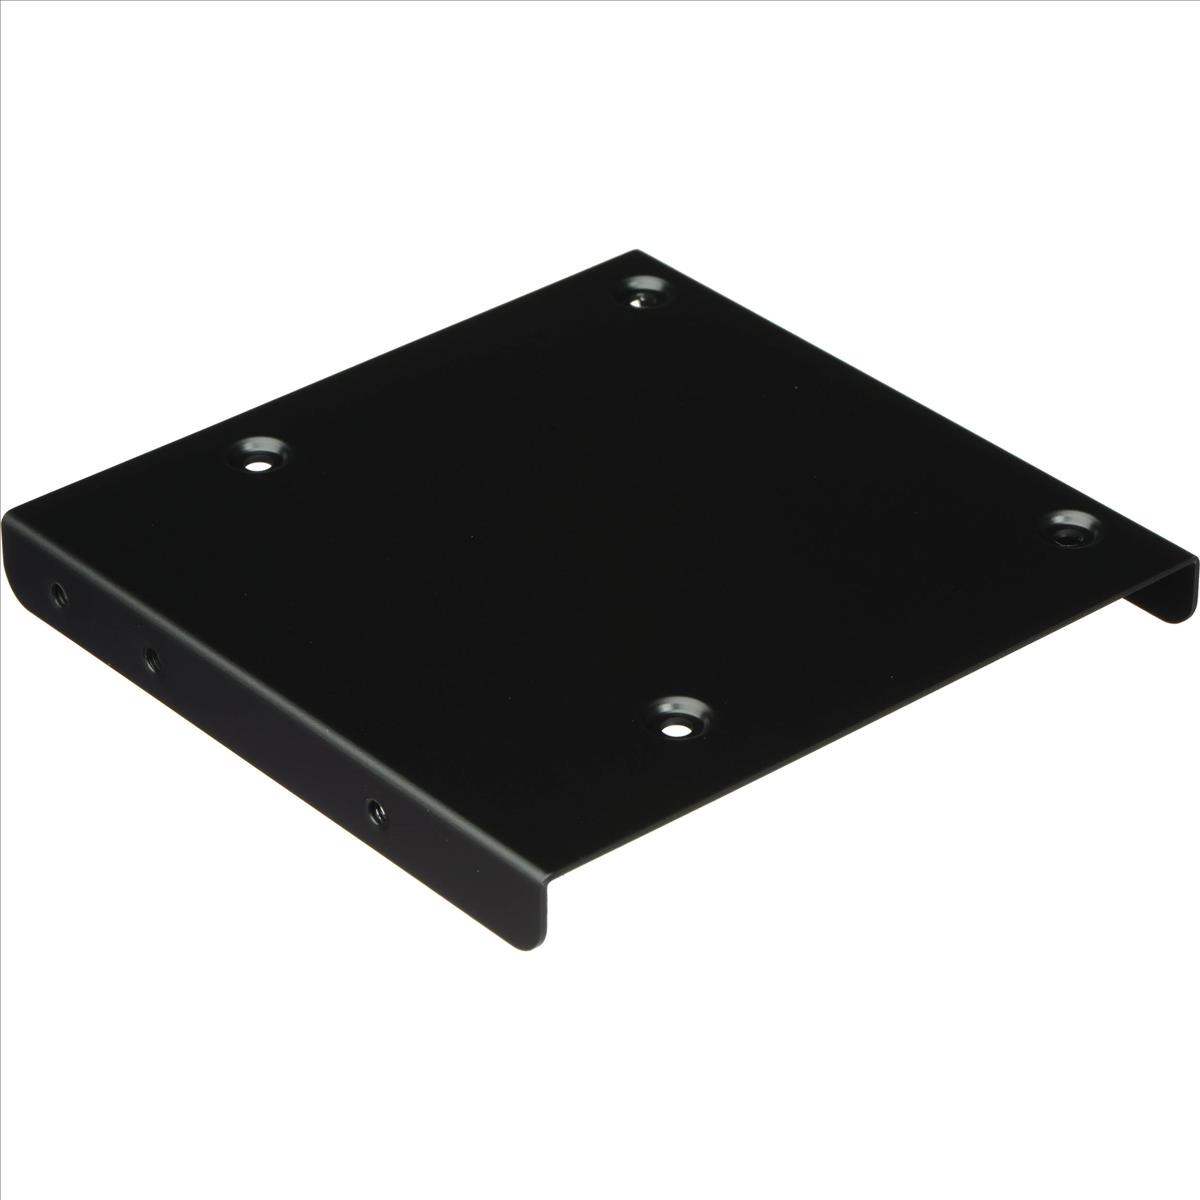 Photos - Other for Computer Crucial 3.5 inch Adaptor Bracket for 2.5 inch Solid-State Drives CTSSDBRKT 